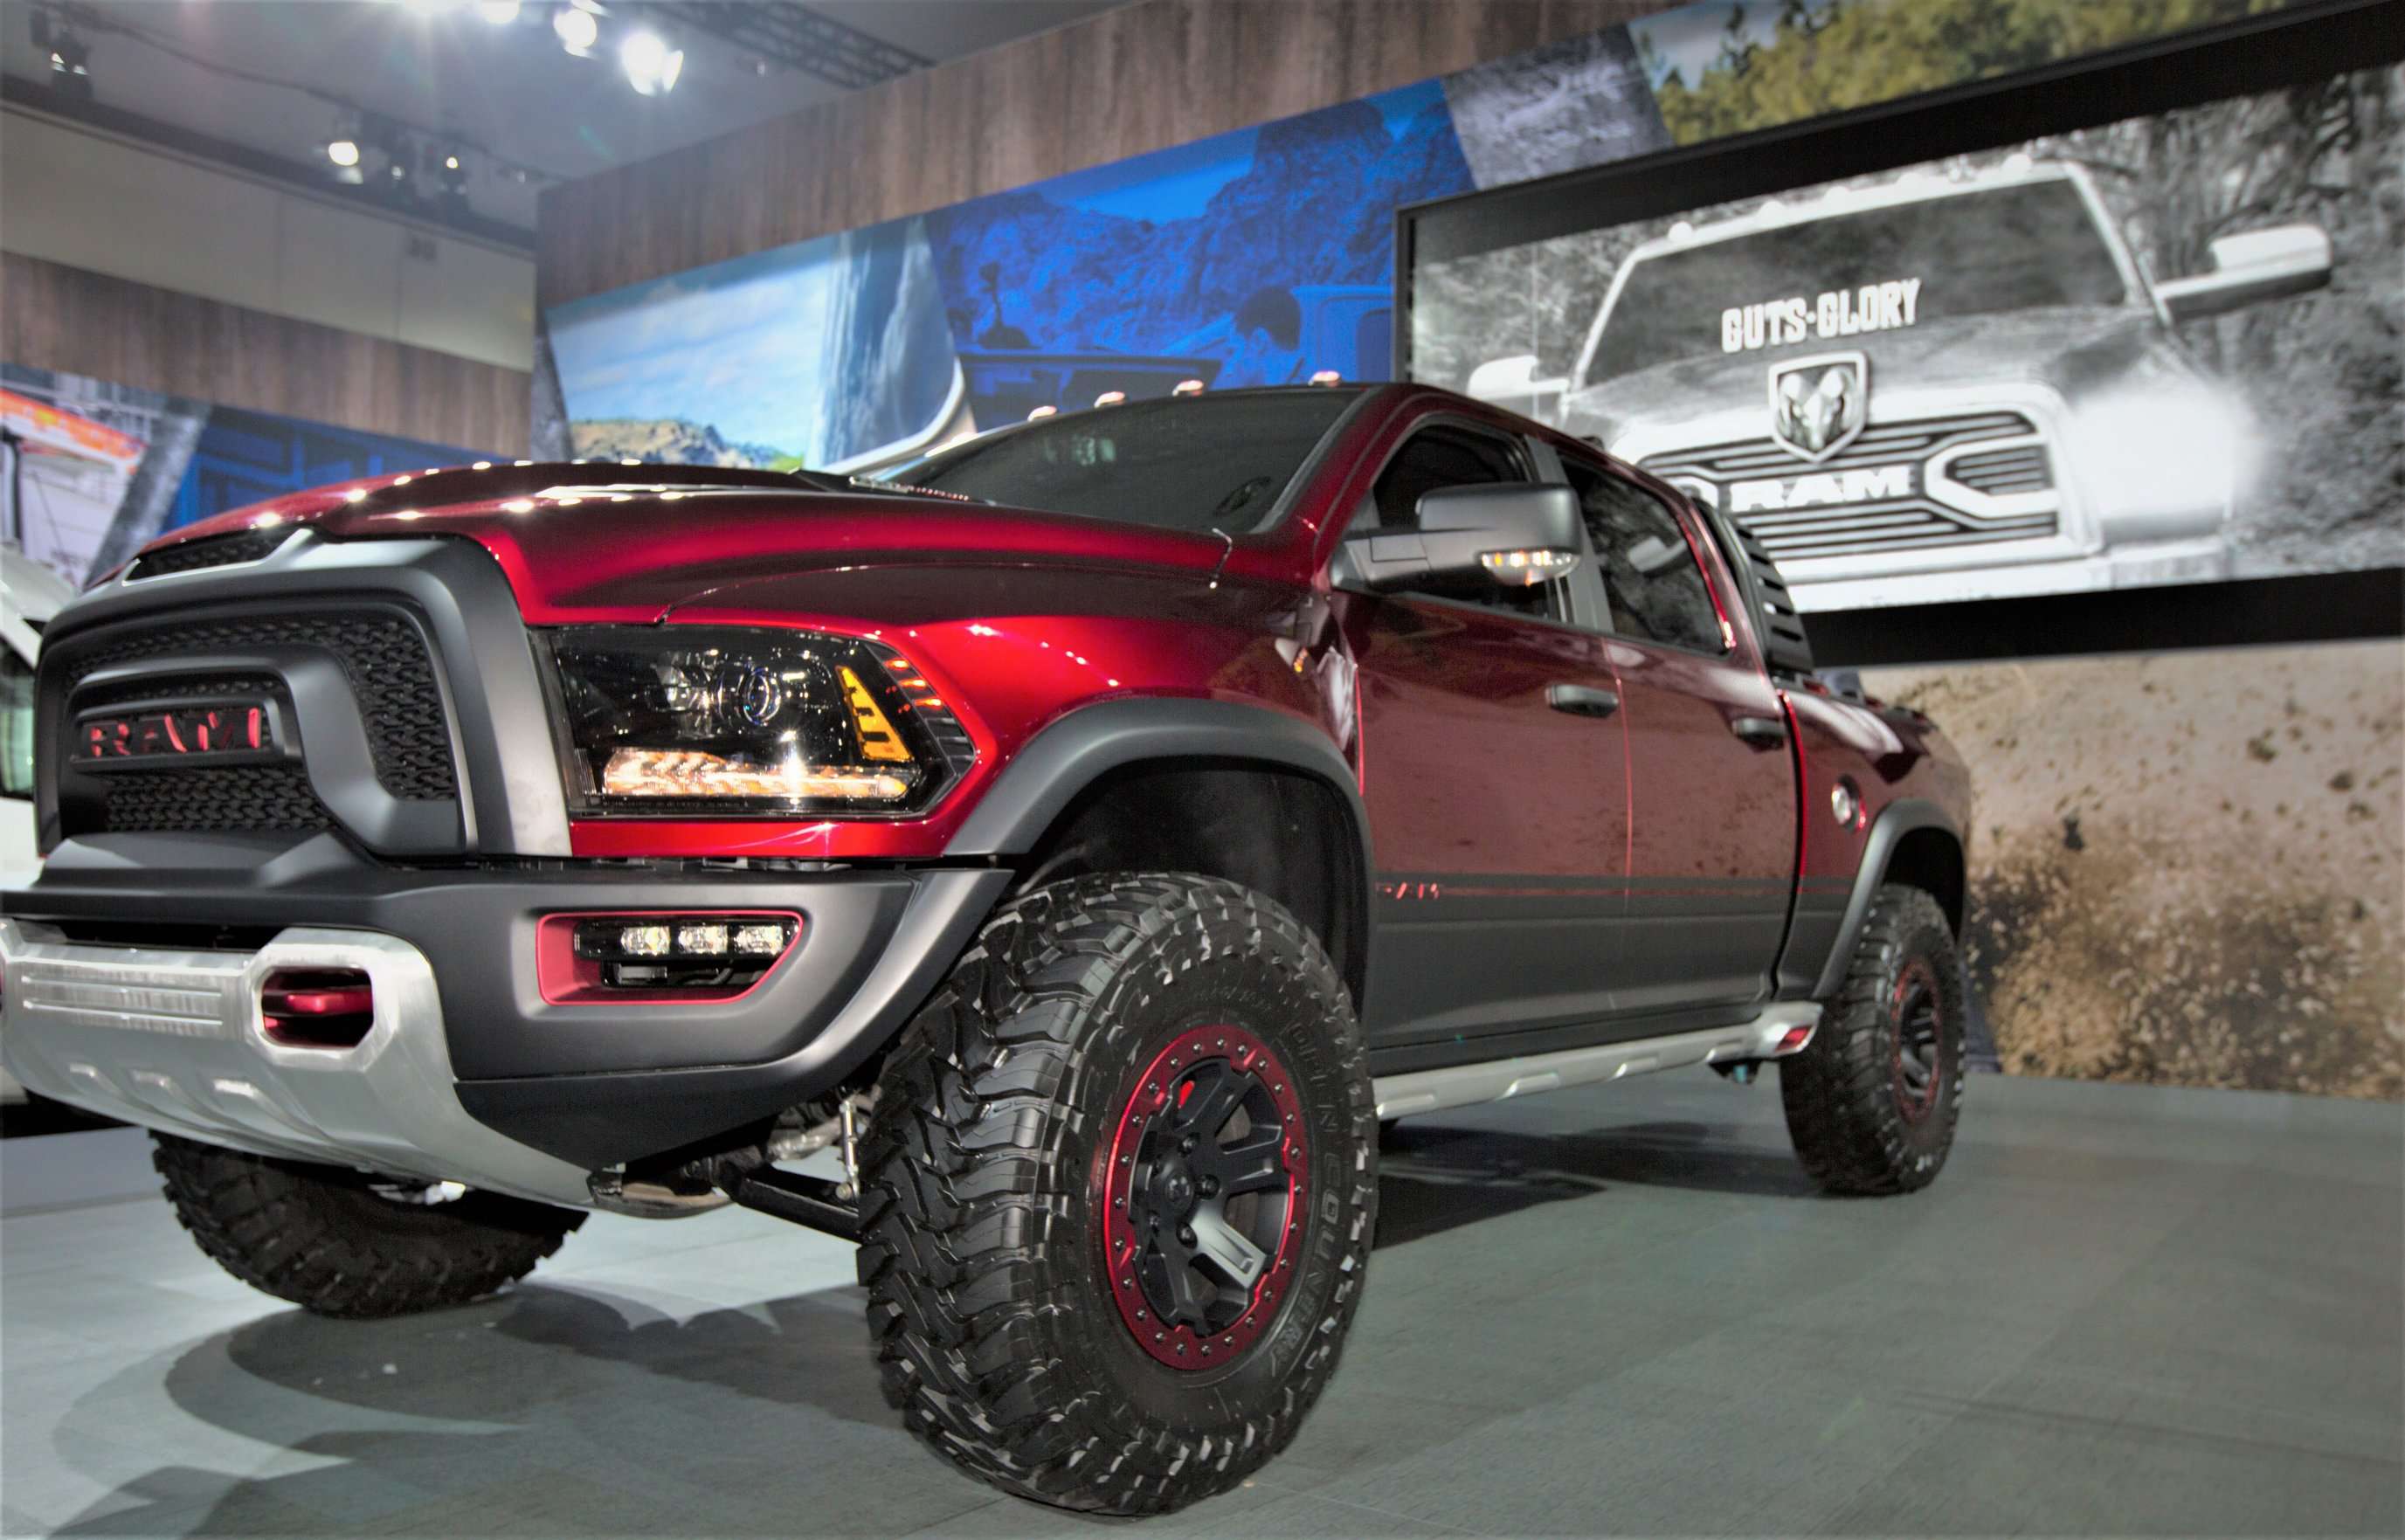 Taboola Ad Example 47799 - Close Out 2019 With A Dodge Ram - It's Simply Stunning!